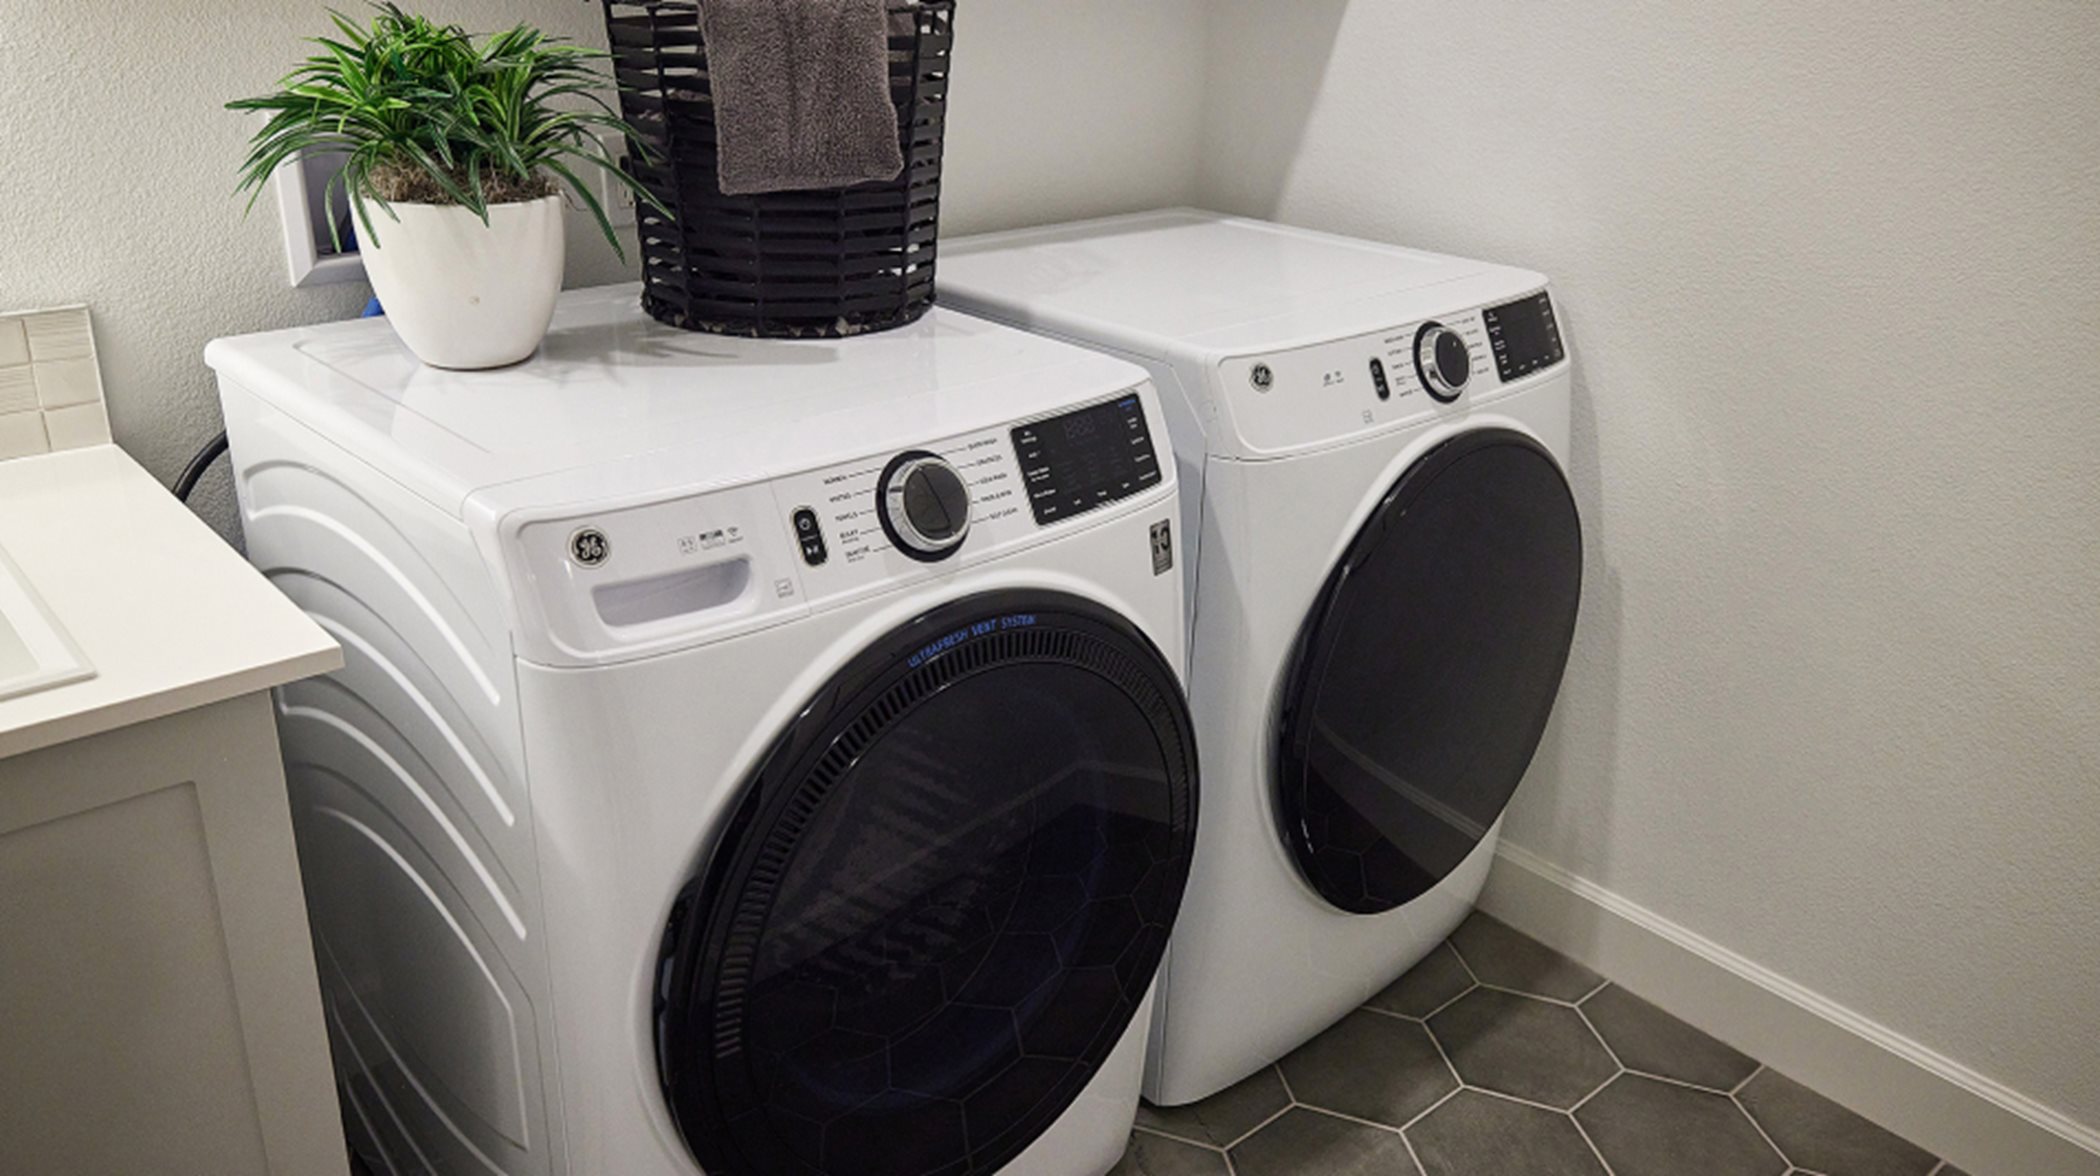 The energy-efficient washer and dryer found in the laundry room helps make chore days simple